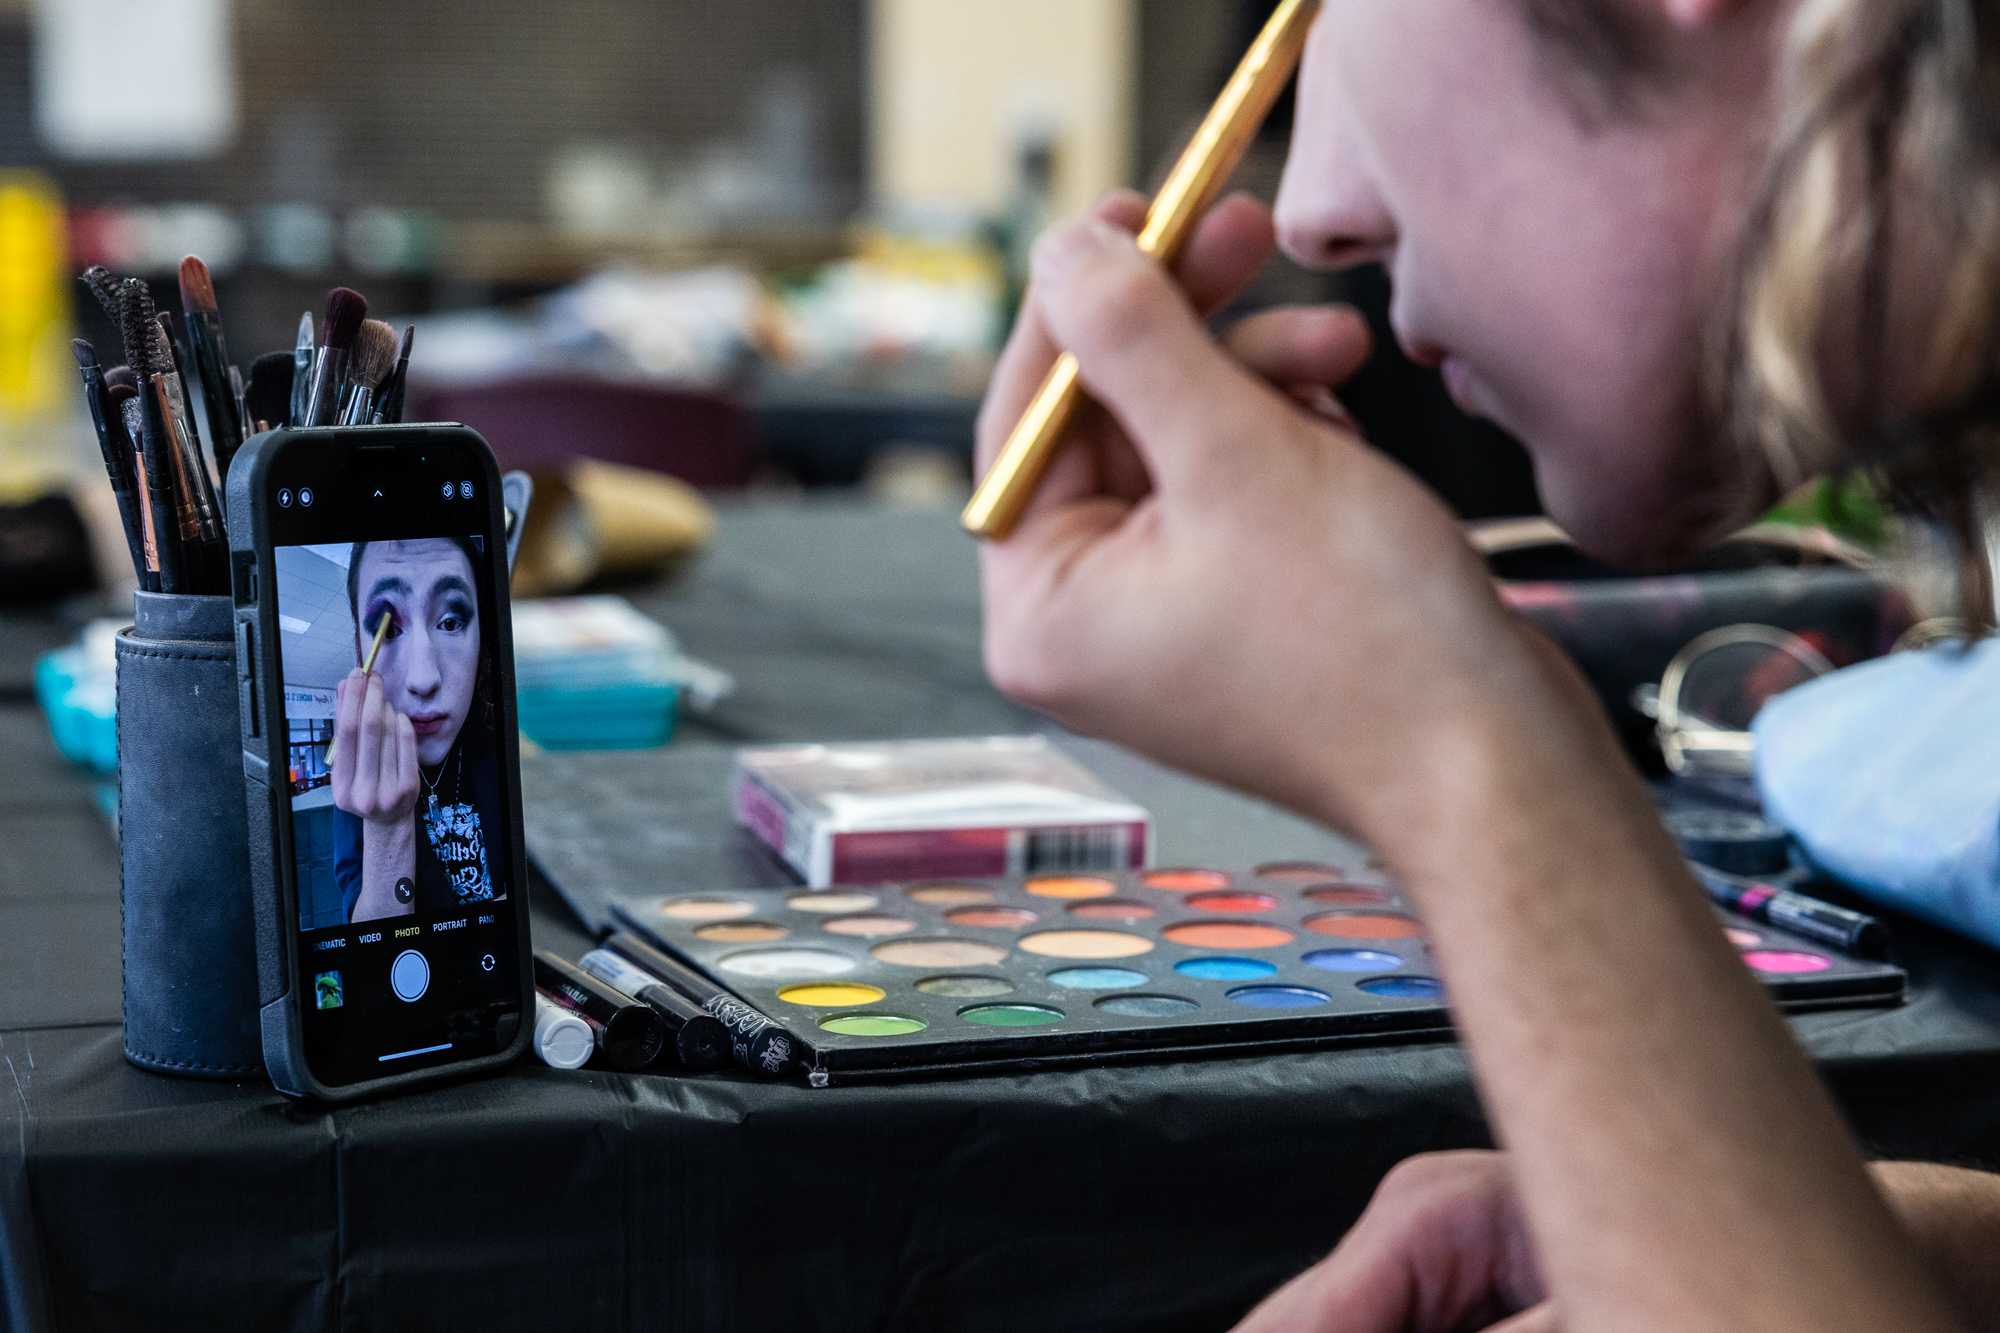 A young woman applies face paint using her phone's camera as a mirror.